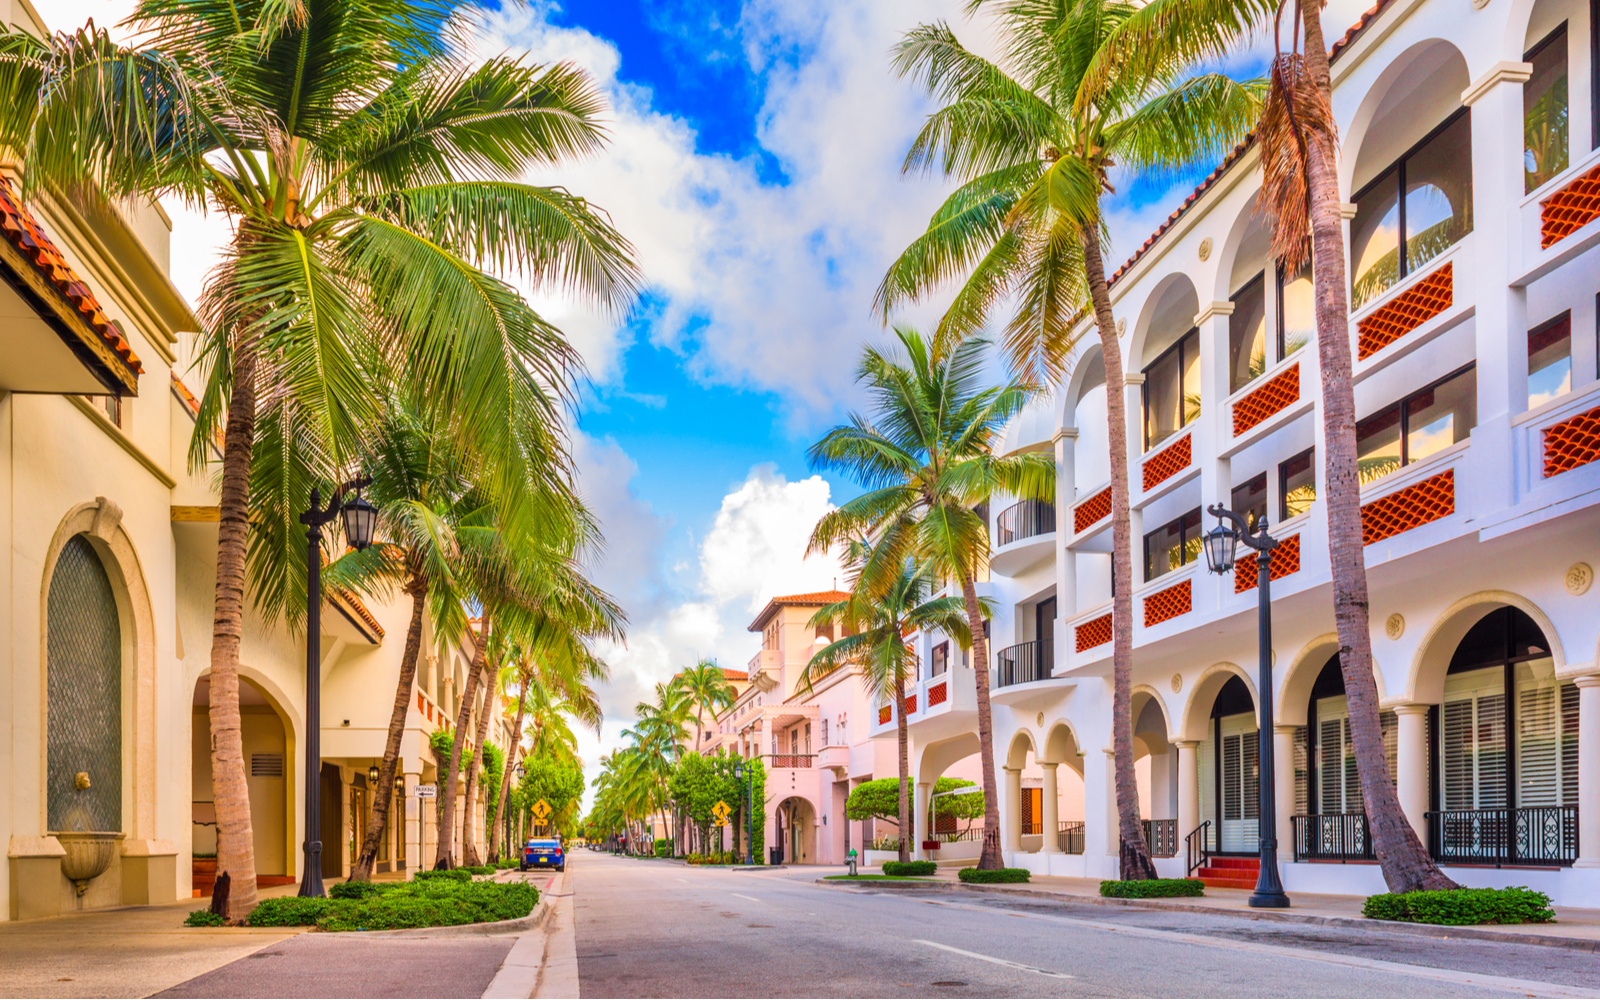 Is Palm Beach Safe to Visit in 2023? | Safety Concerns